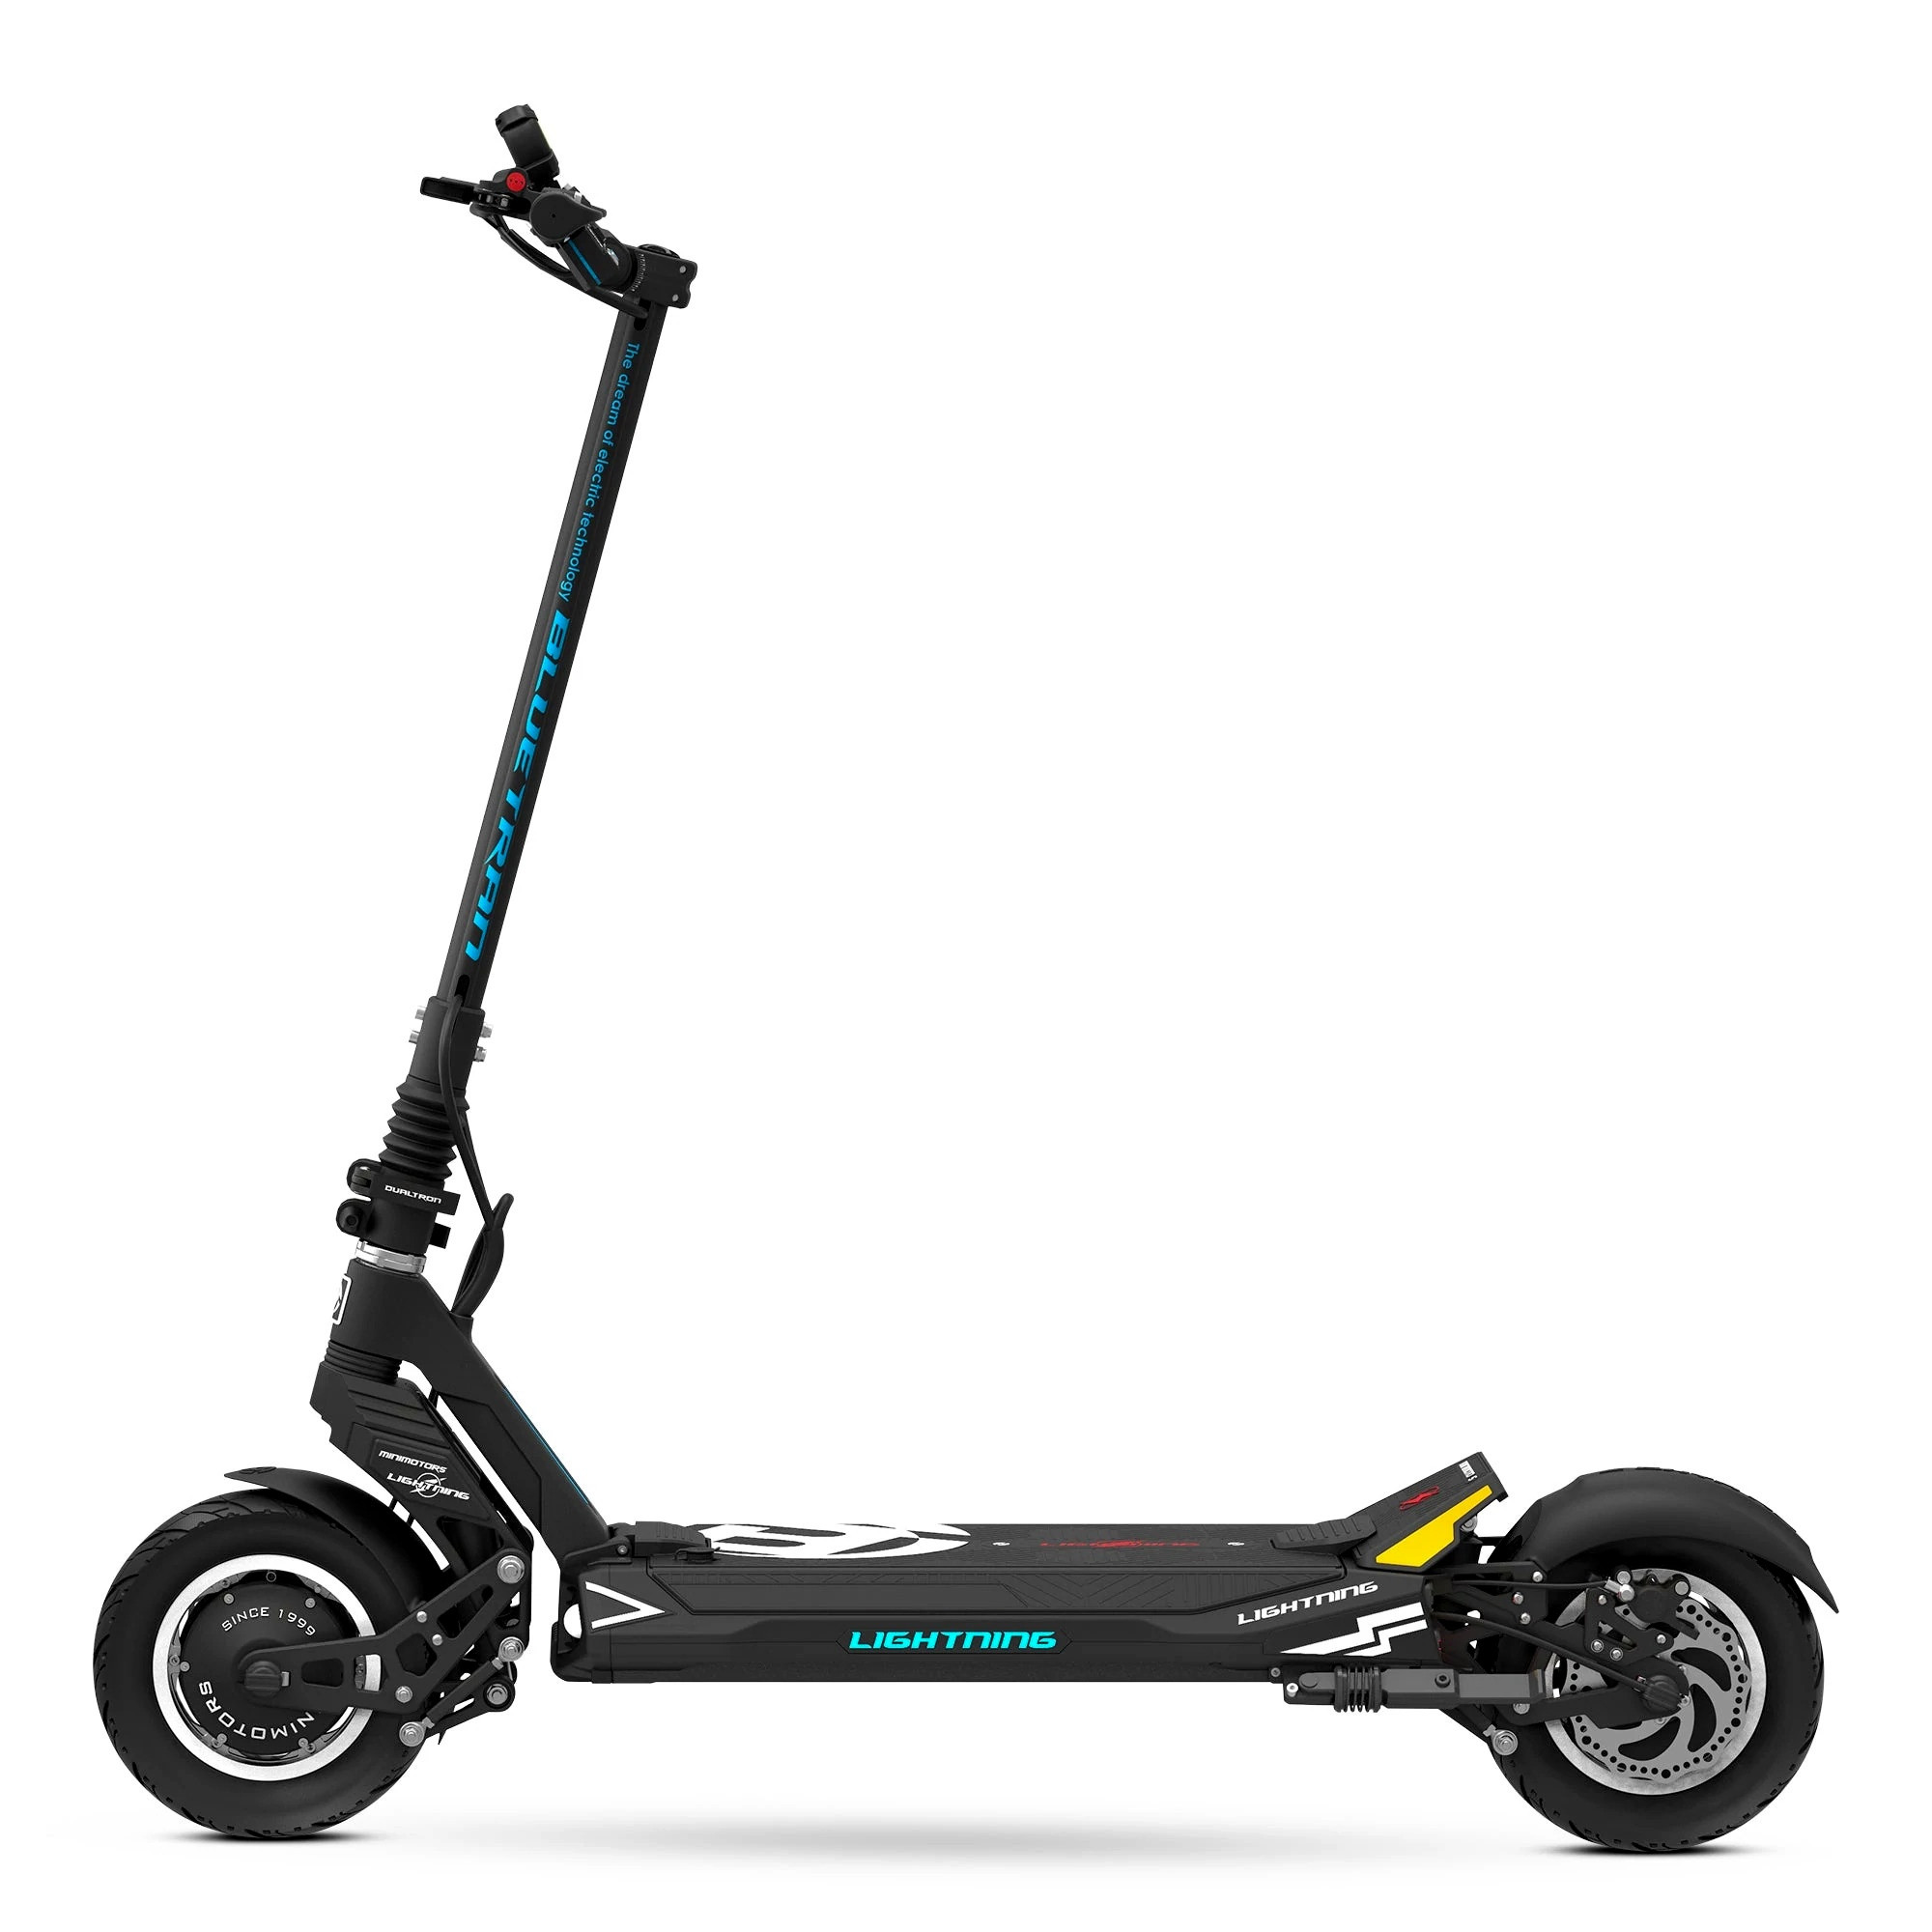 Electric scooter Buletran Lightning in stock. - Enjoy the ride